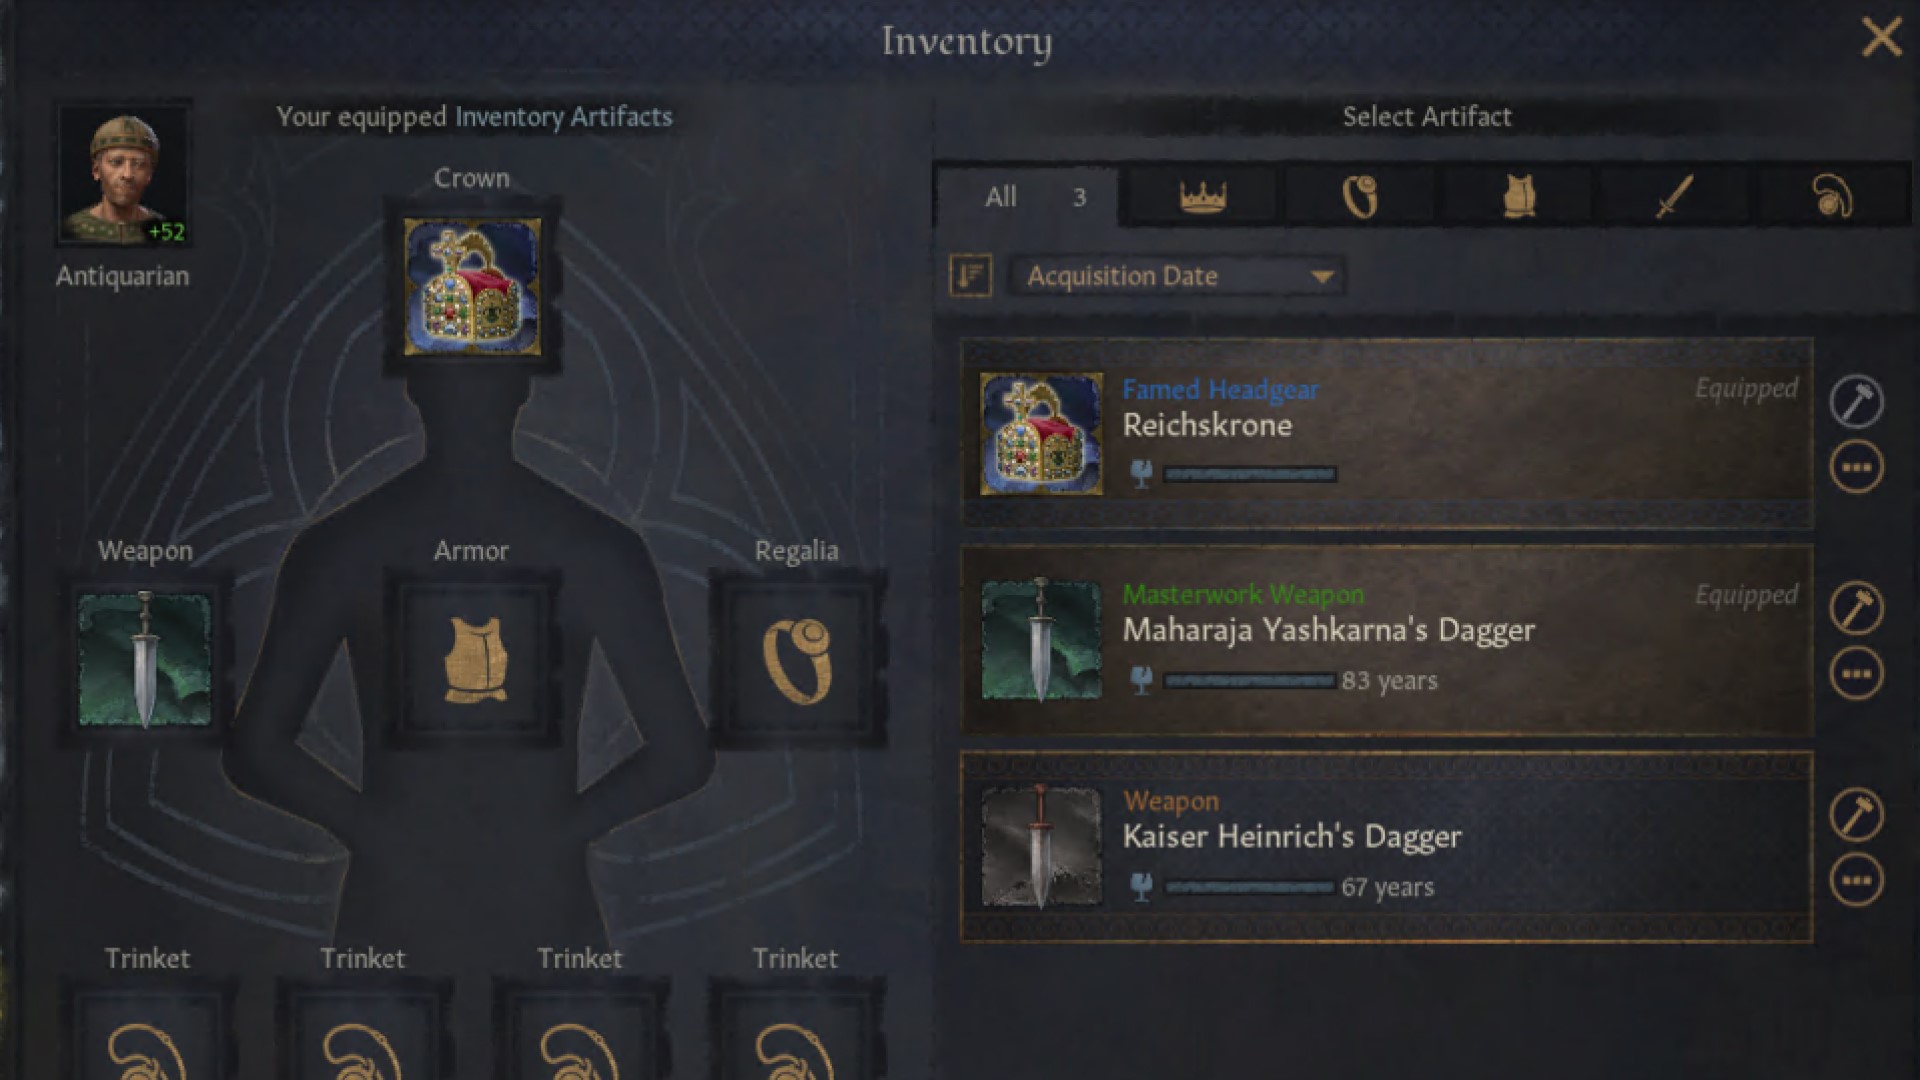 Crusader Kings 3 is getting an RPG-style inventory system